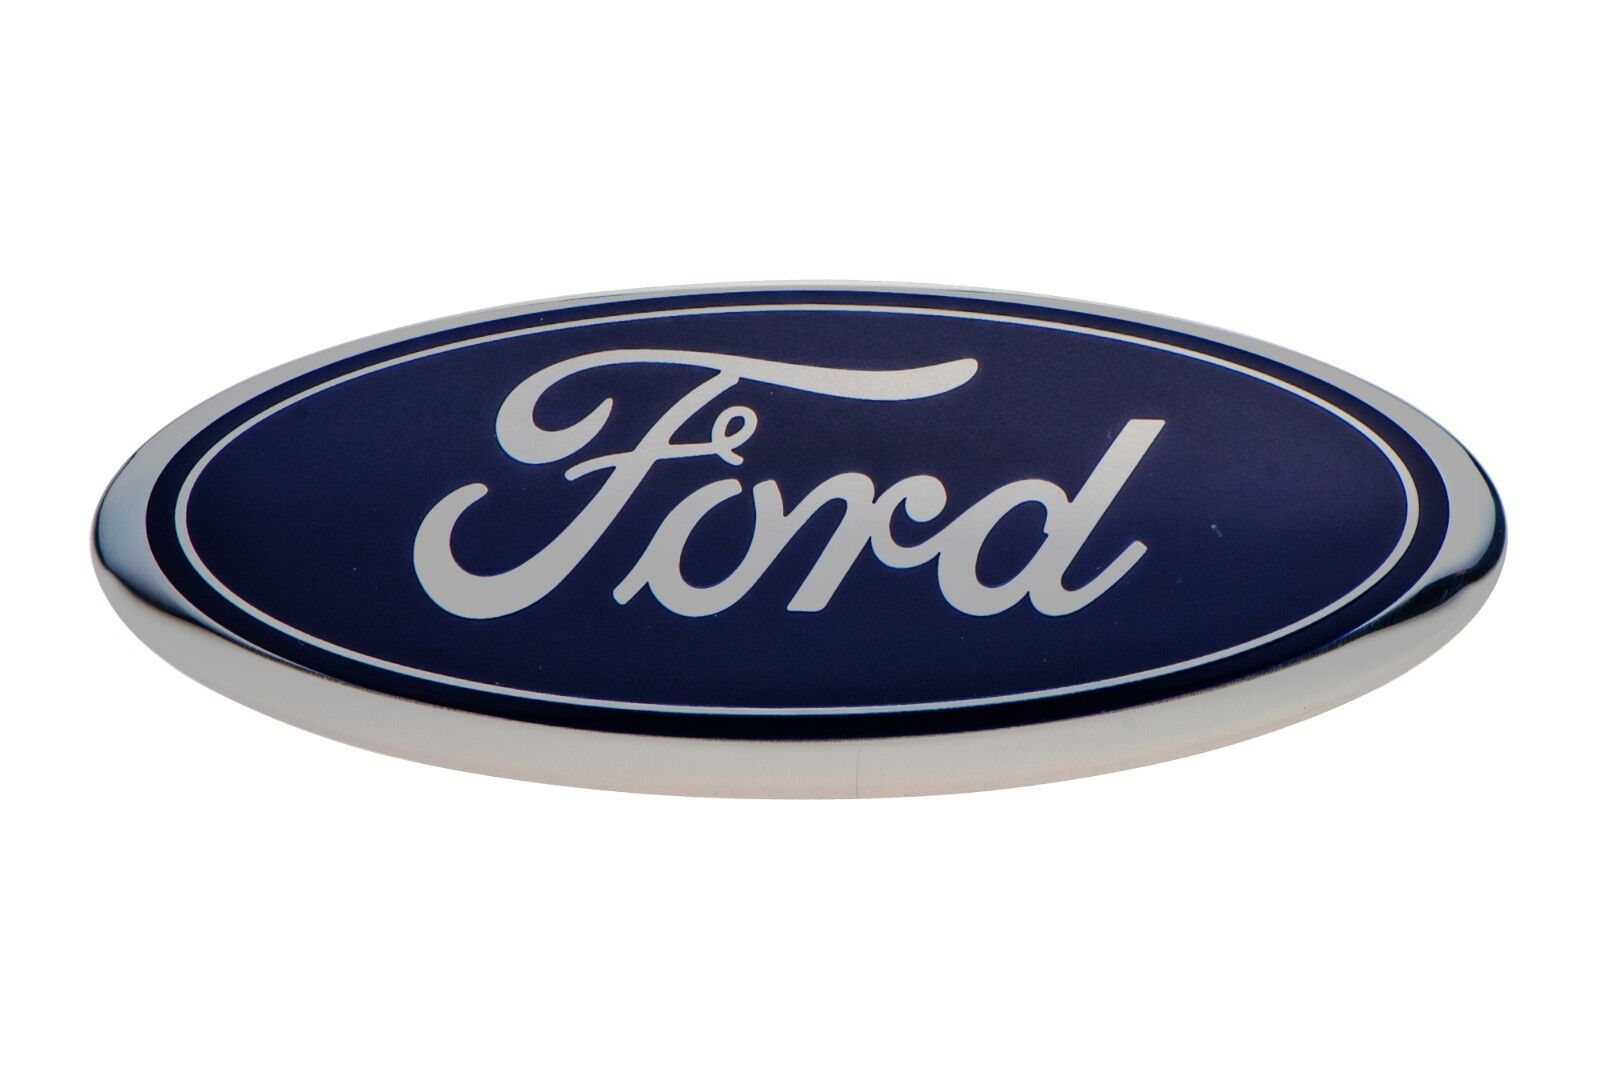 2006-2013 Ford Front Grille Blue FORD Oval Emblem Escape Taurus Fusion Focus OEM